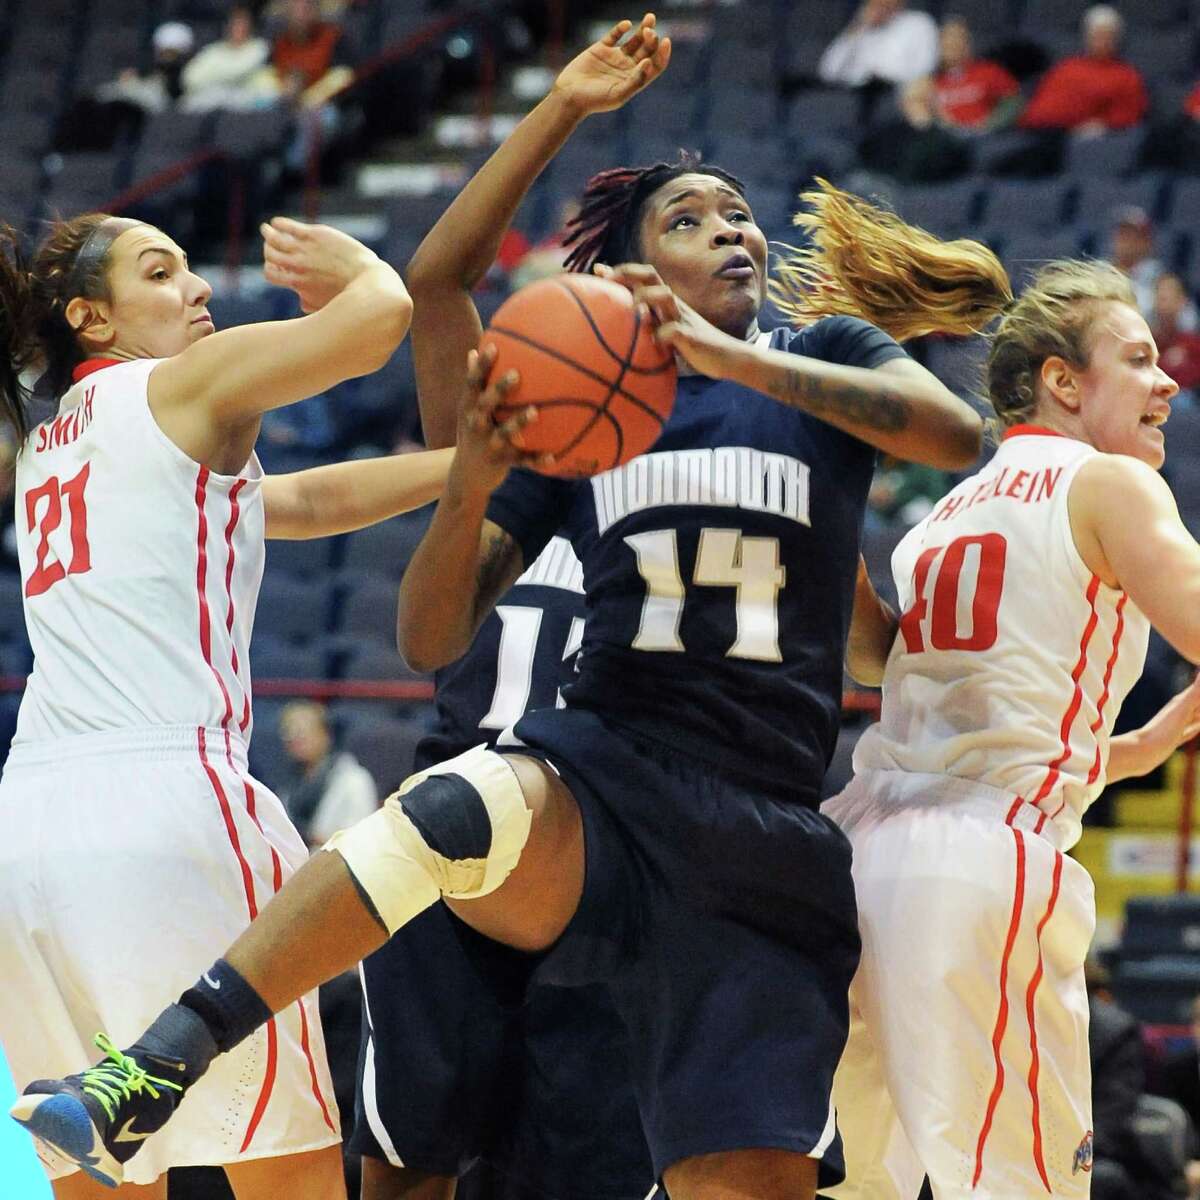 Monmouth's # 14 Christina Mitchel beats out Fairfield's #21 Casey Smith , left, and #40 Kristin Schatzlein, right, to a rebound during their MAAC women's quarterfinal at the Times Union Center Saturday March 5, 2016 in Albany, NY. (John Carl D'Annibale / Times Union)